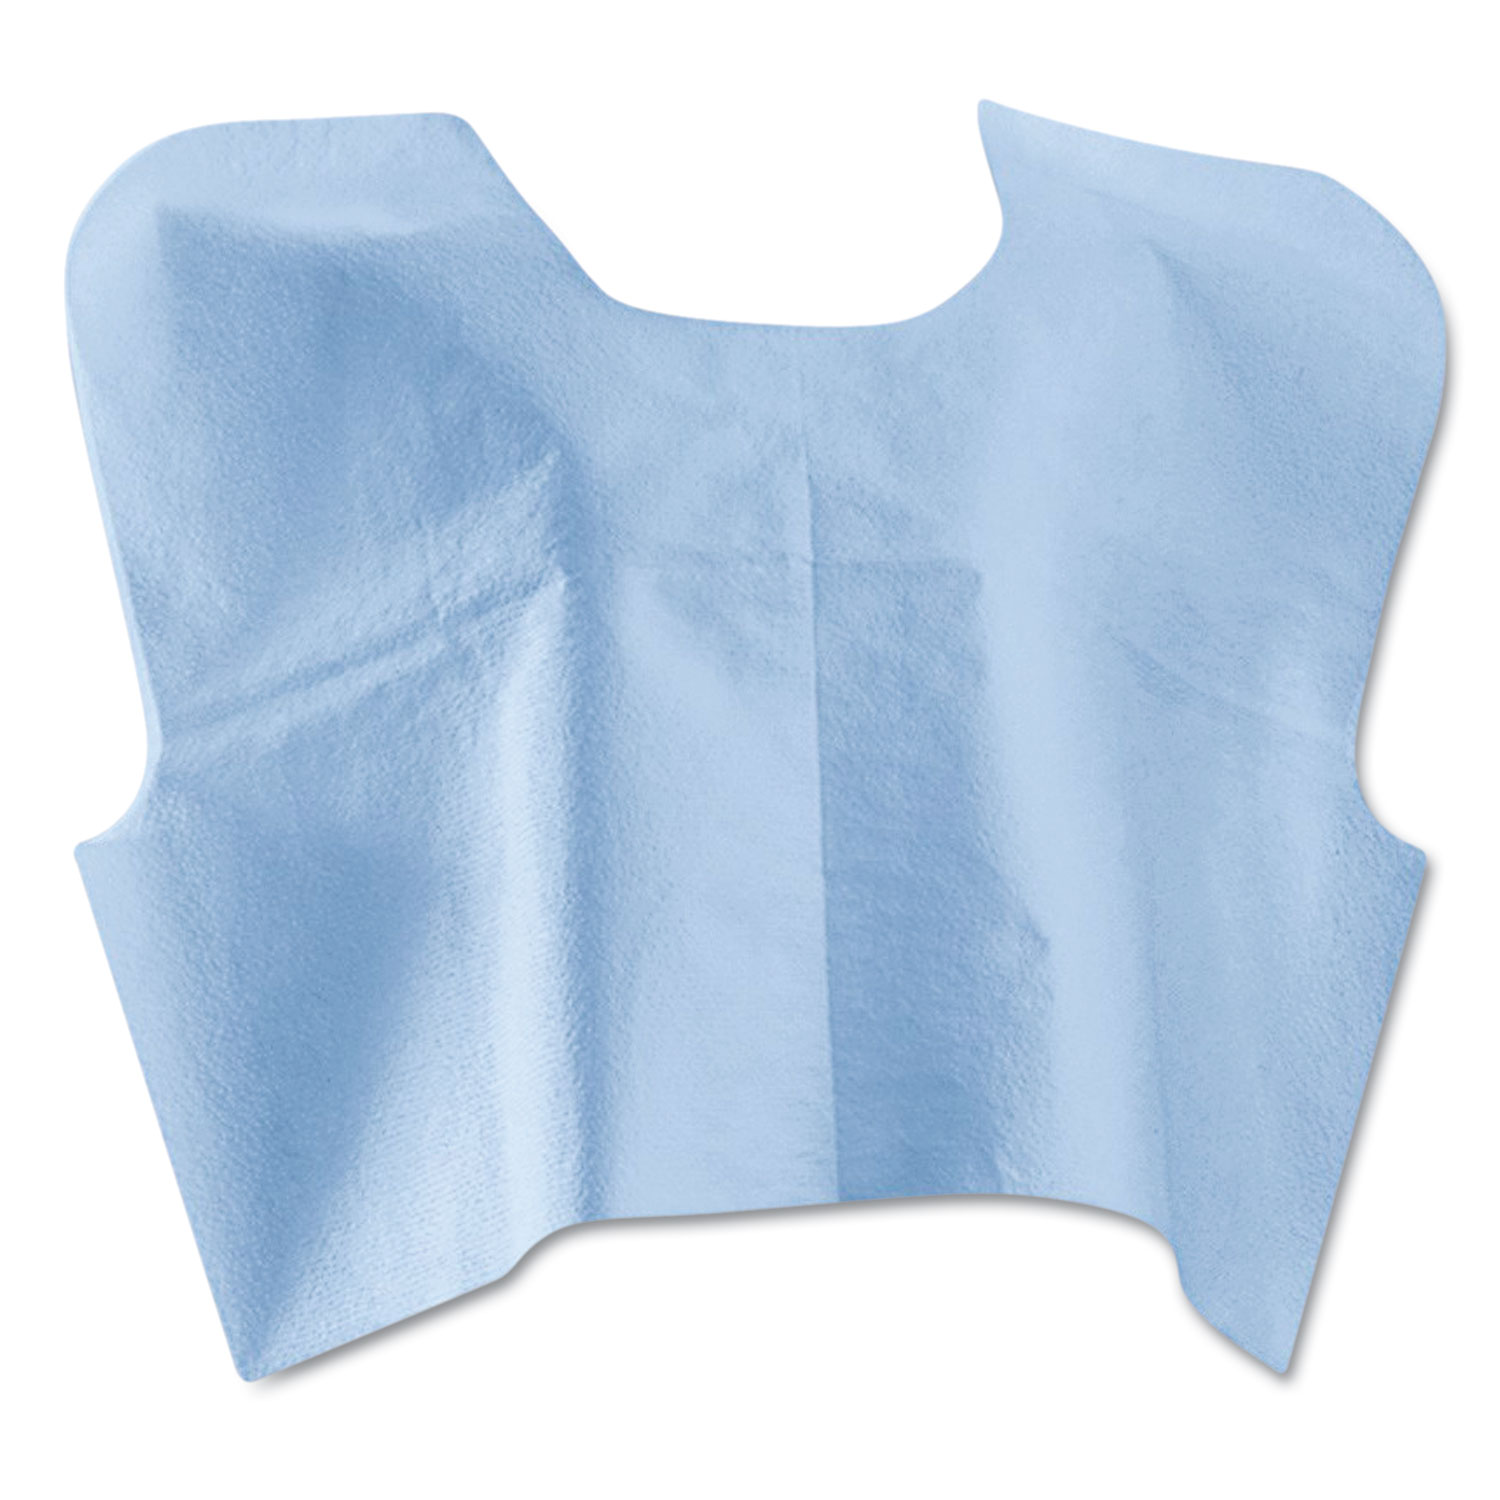 Disposable Patient Capes, 3-Ply T/P/T, 30 in. x 21 in., Blue 100/Carton